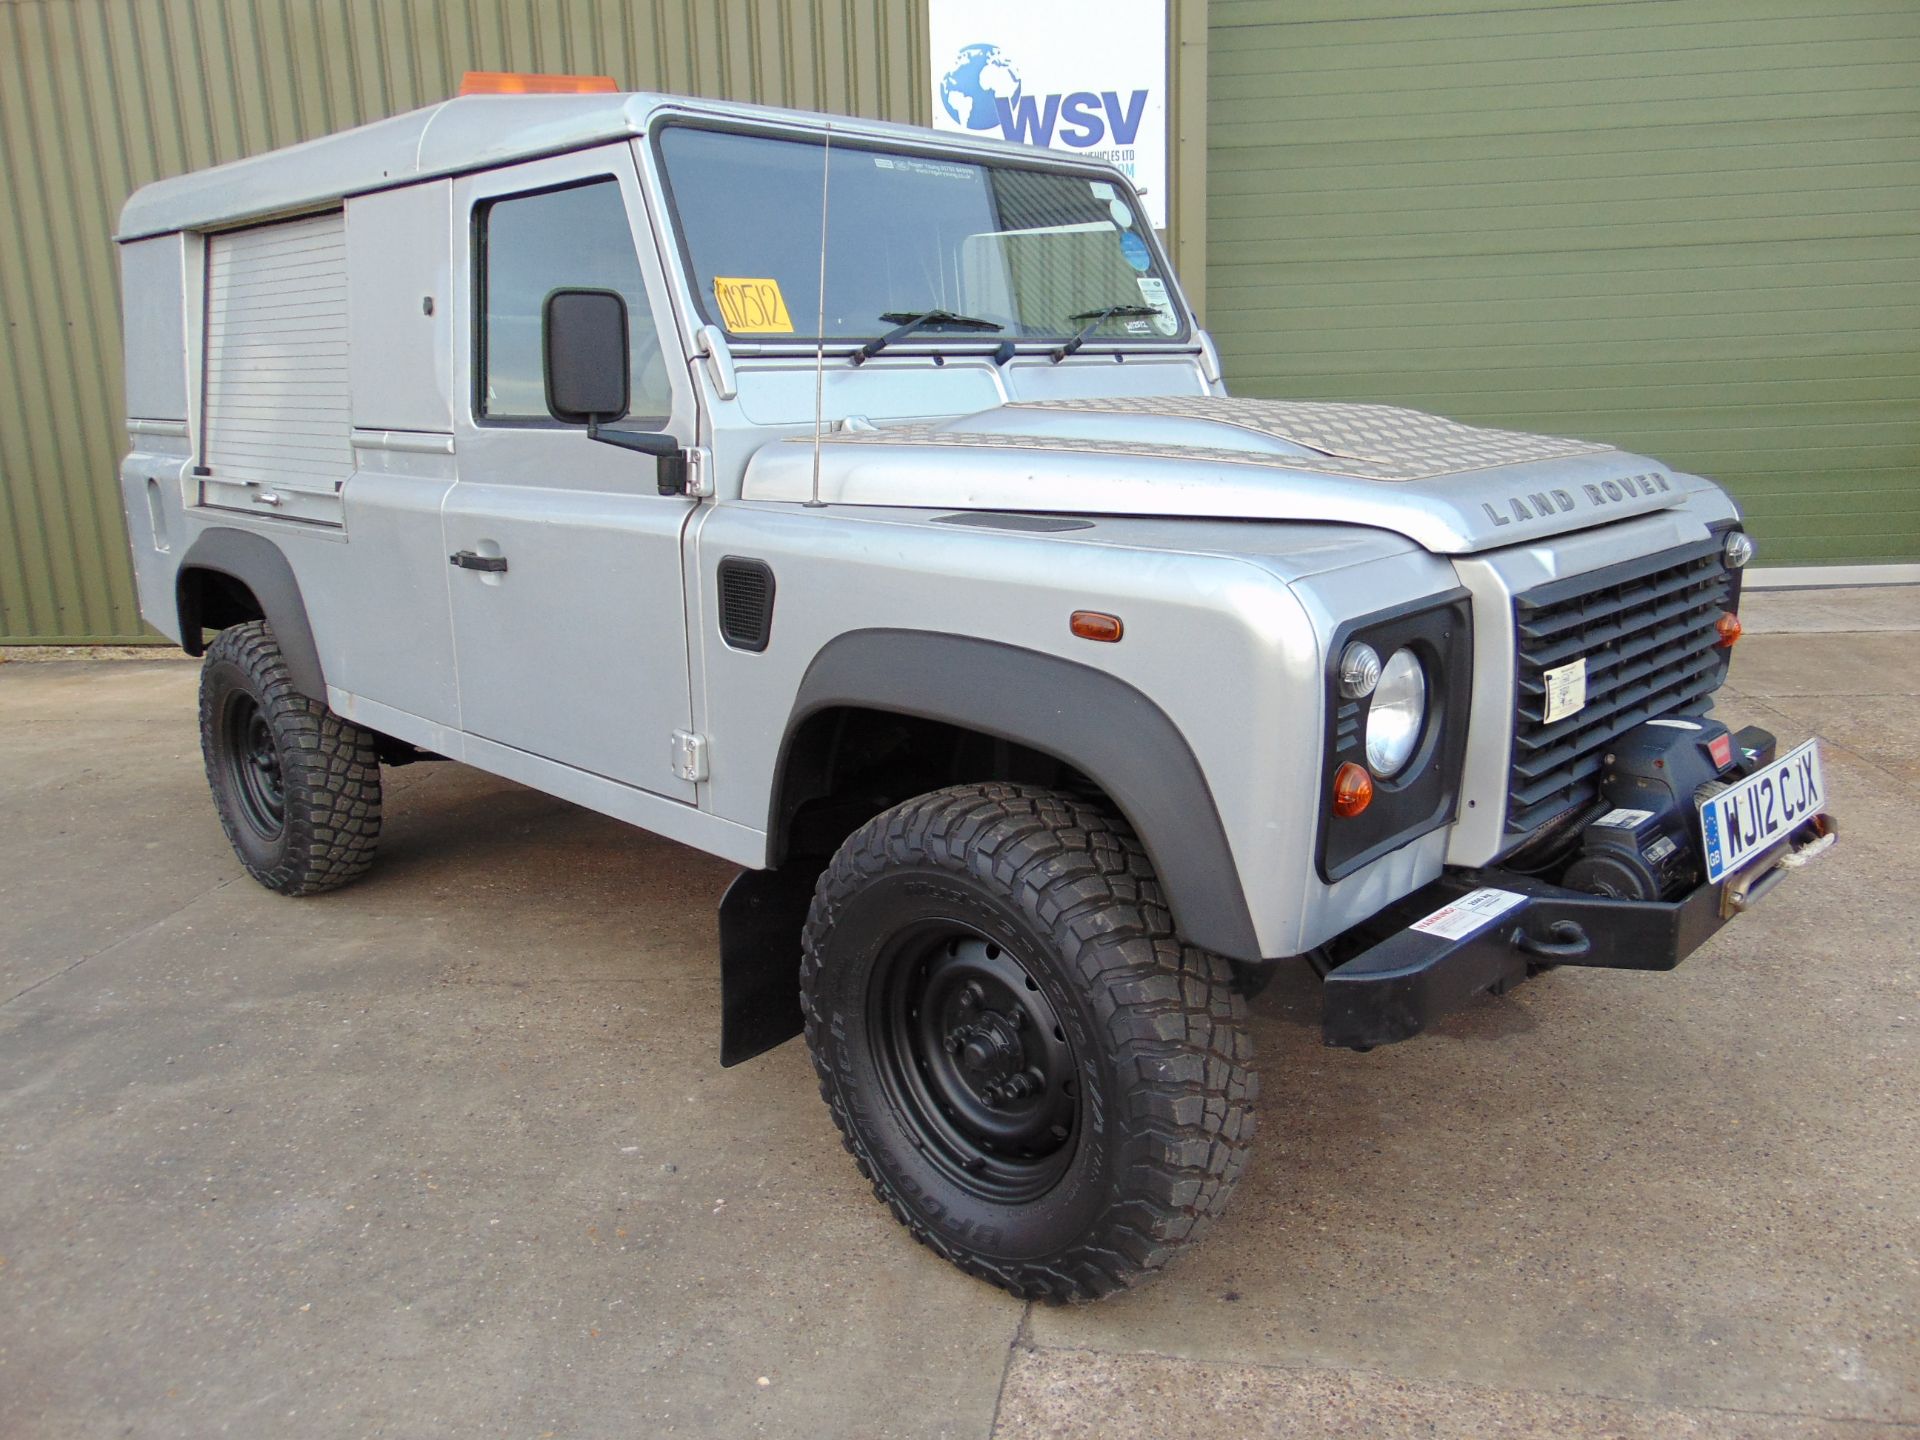 1 Owner 2013 Land Rover Defender 110 Puma hardtop 4x4 Utility vehicle ONLY 101,176 MILES!